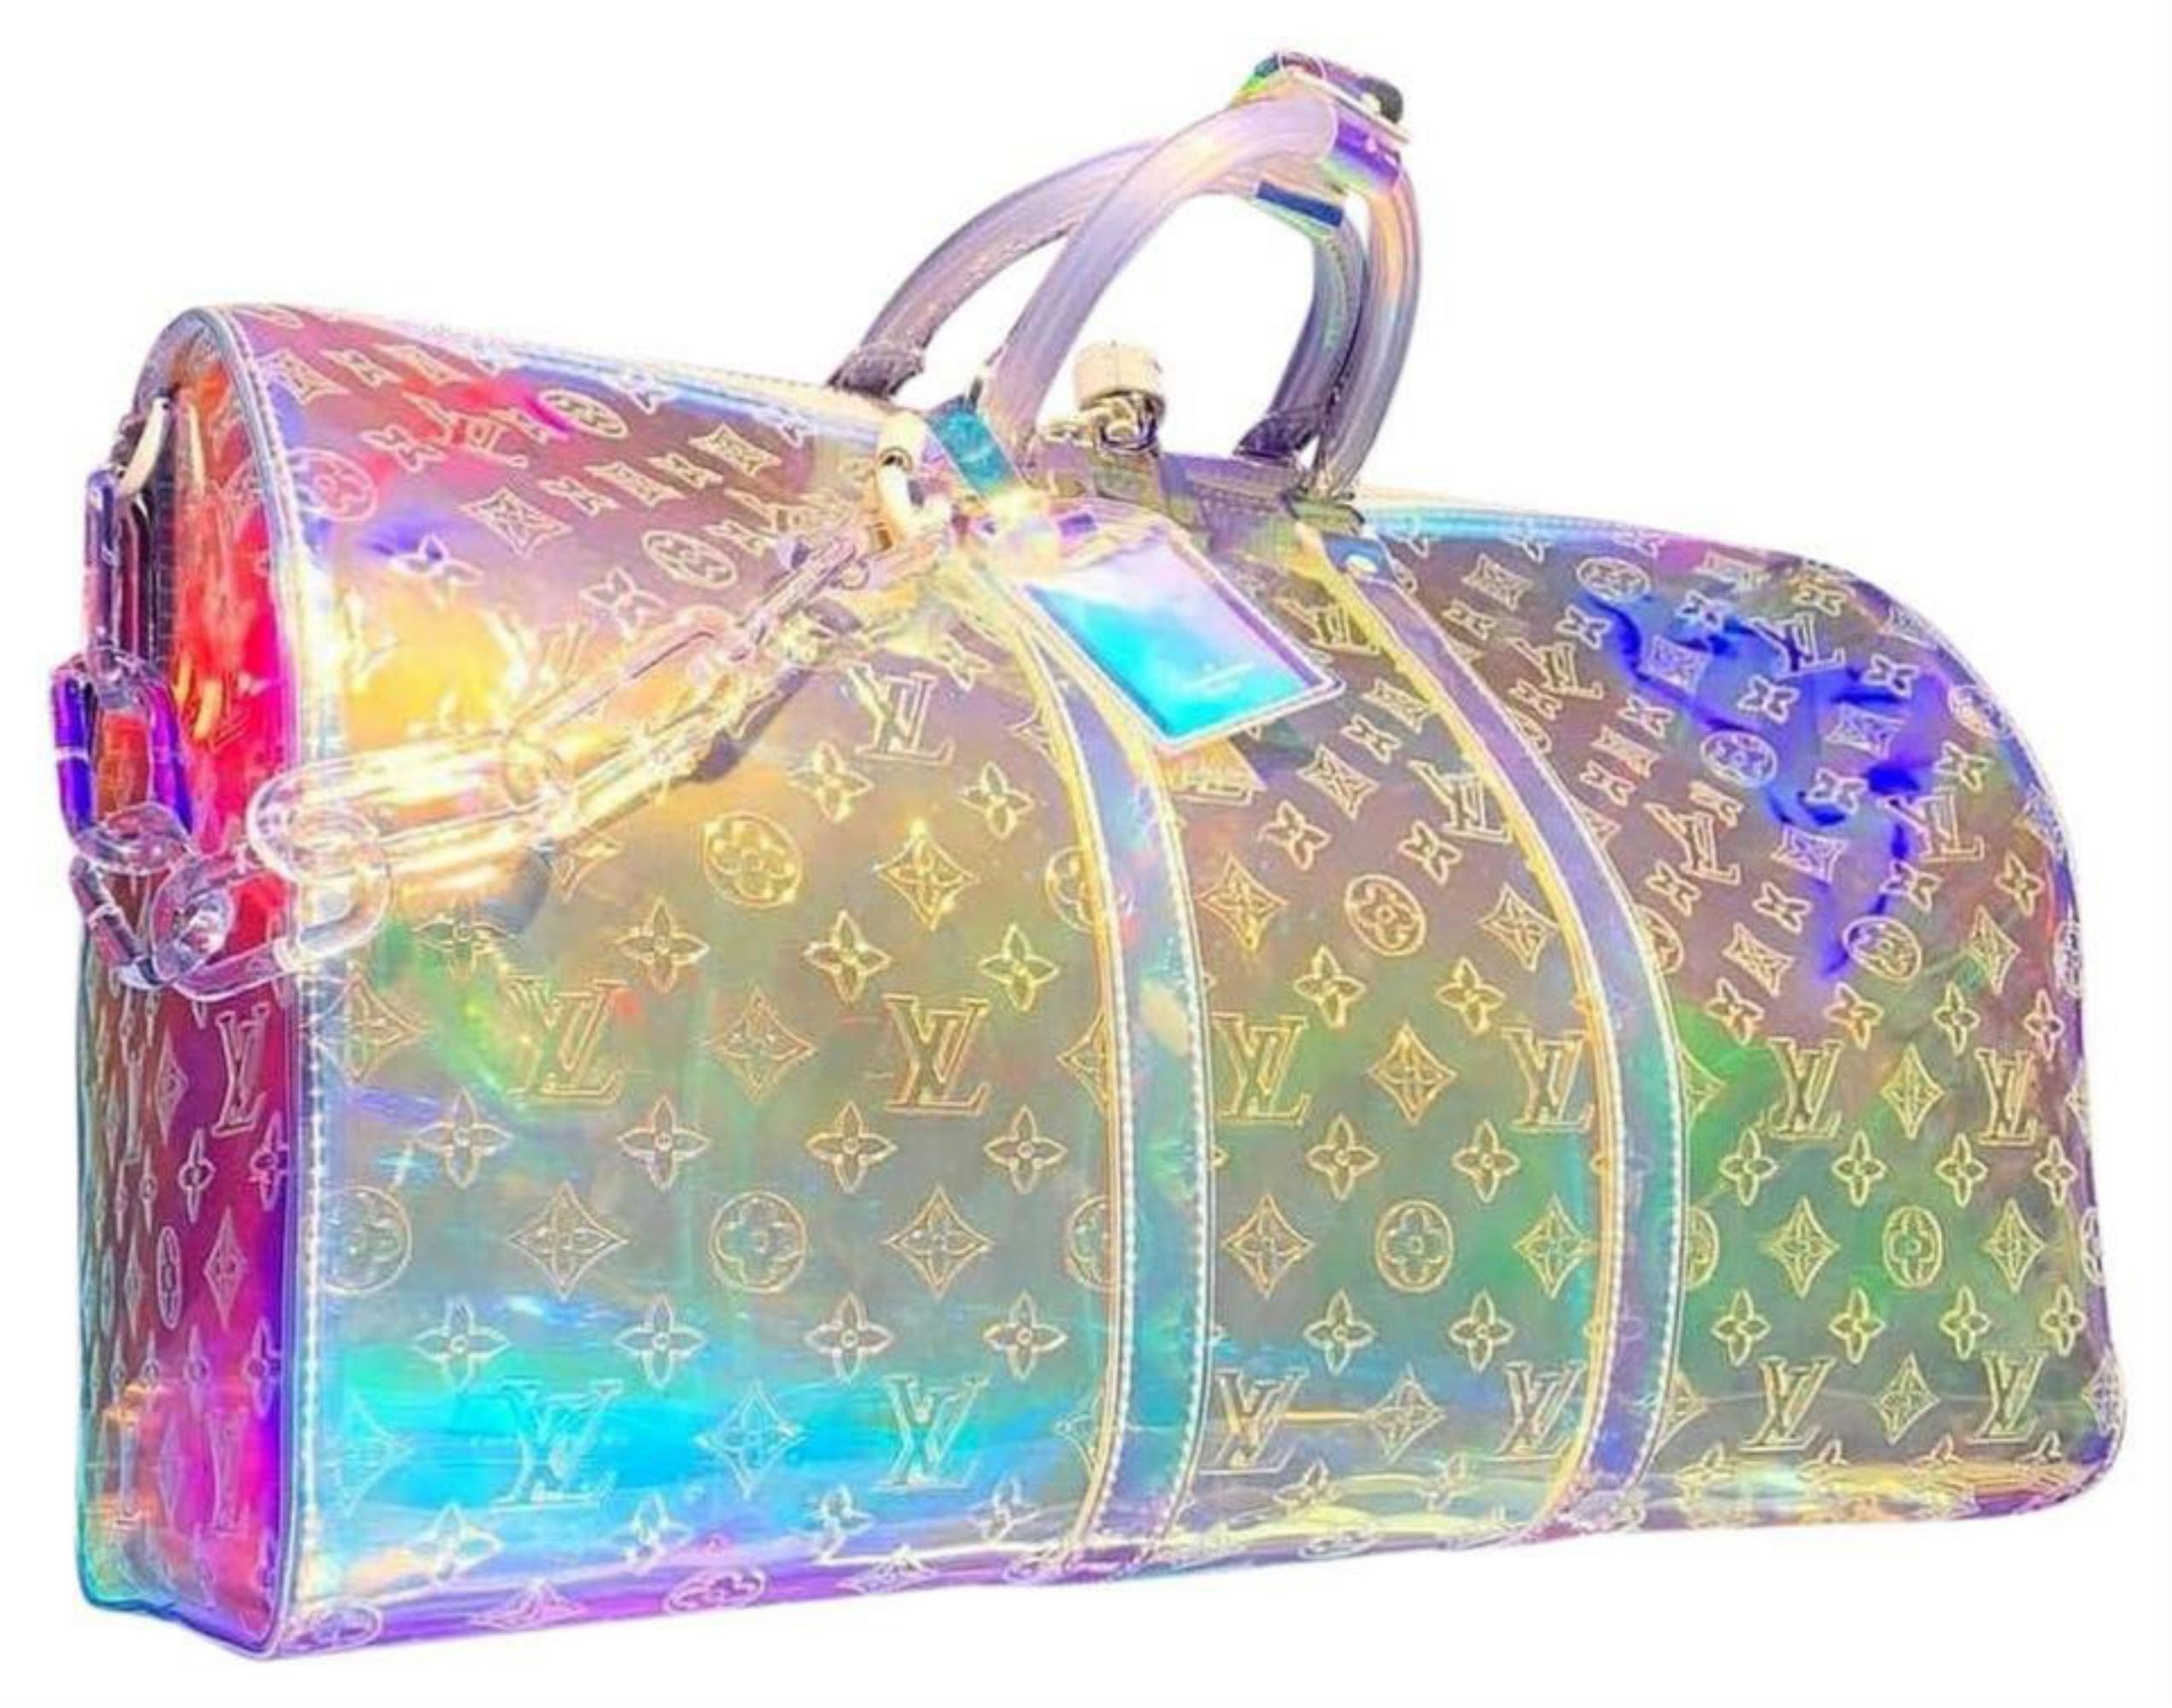 Louis Vuitton Keepall Ss19  Hologram Prism 50 Bandouliere 870370 Travel Bag For Sale 4